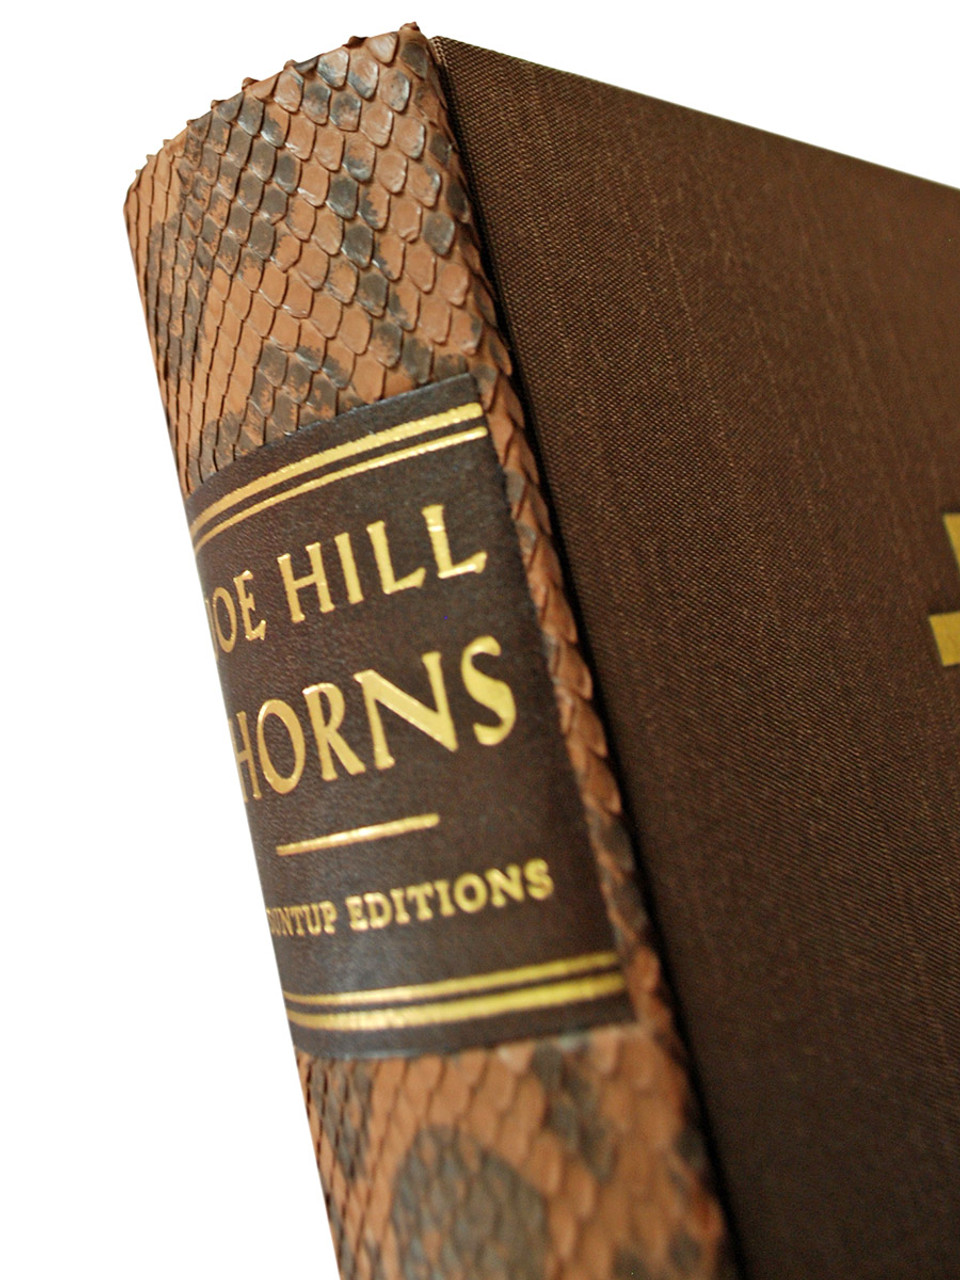 Joe Hill "Horns" Signed Limited Edition No. 90  of 250 w/Limited Promotional Art Kit [Very Fine]